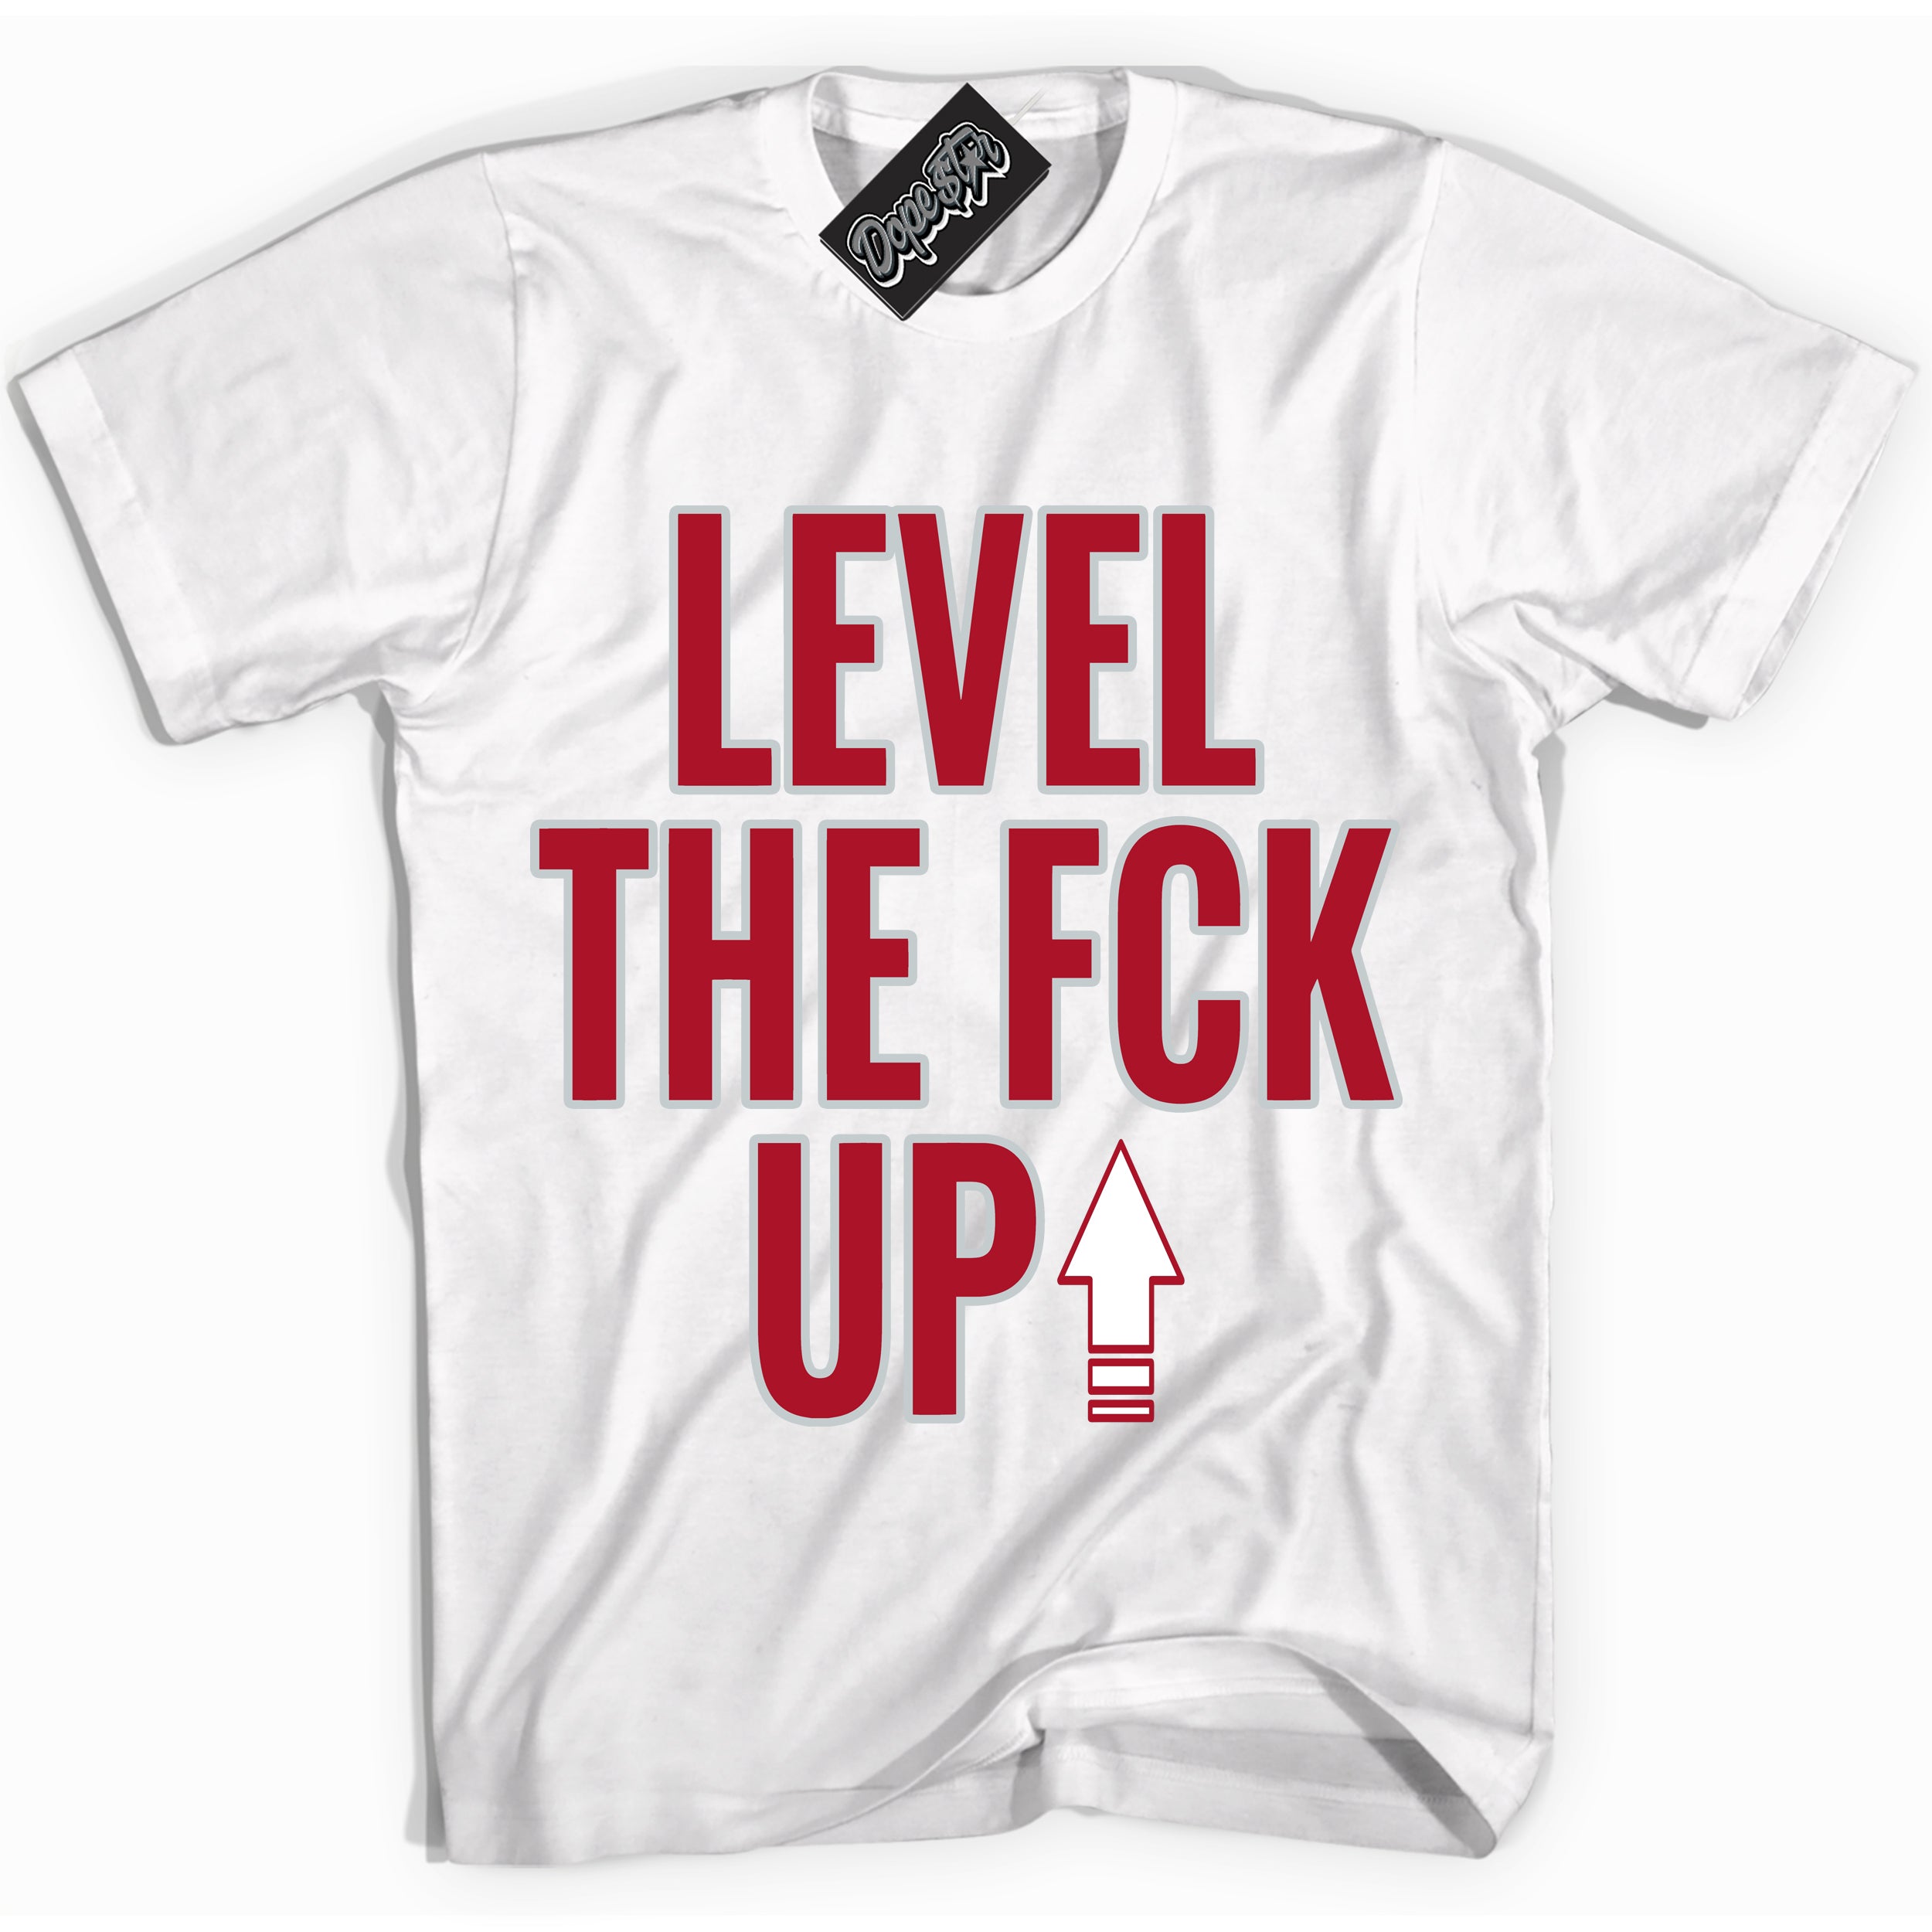 Cool White Shirt with “ Level The Fck Up” design that perfectly matches Reverse Ultraman Sneakers.